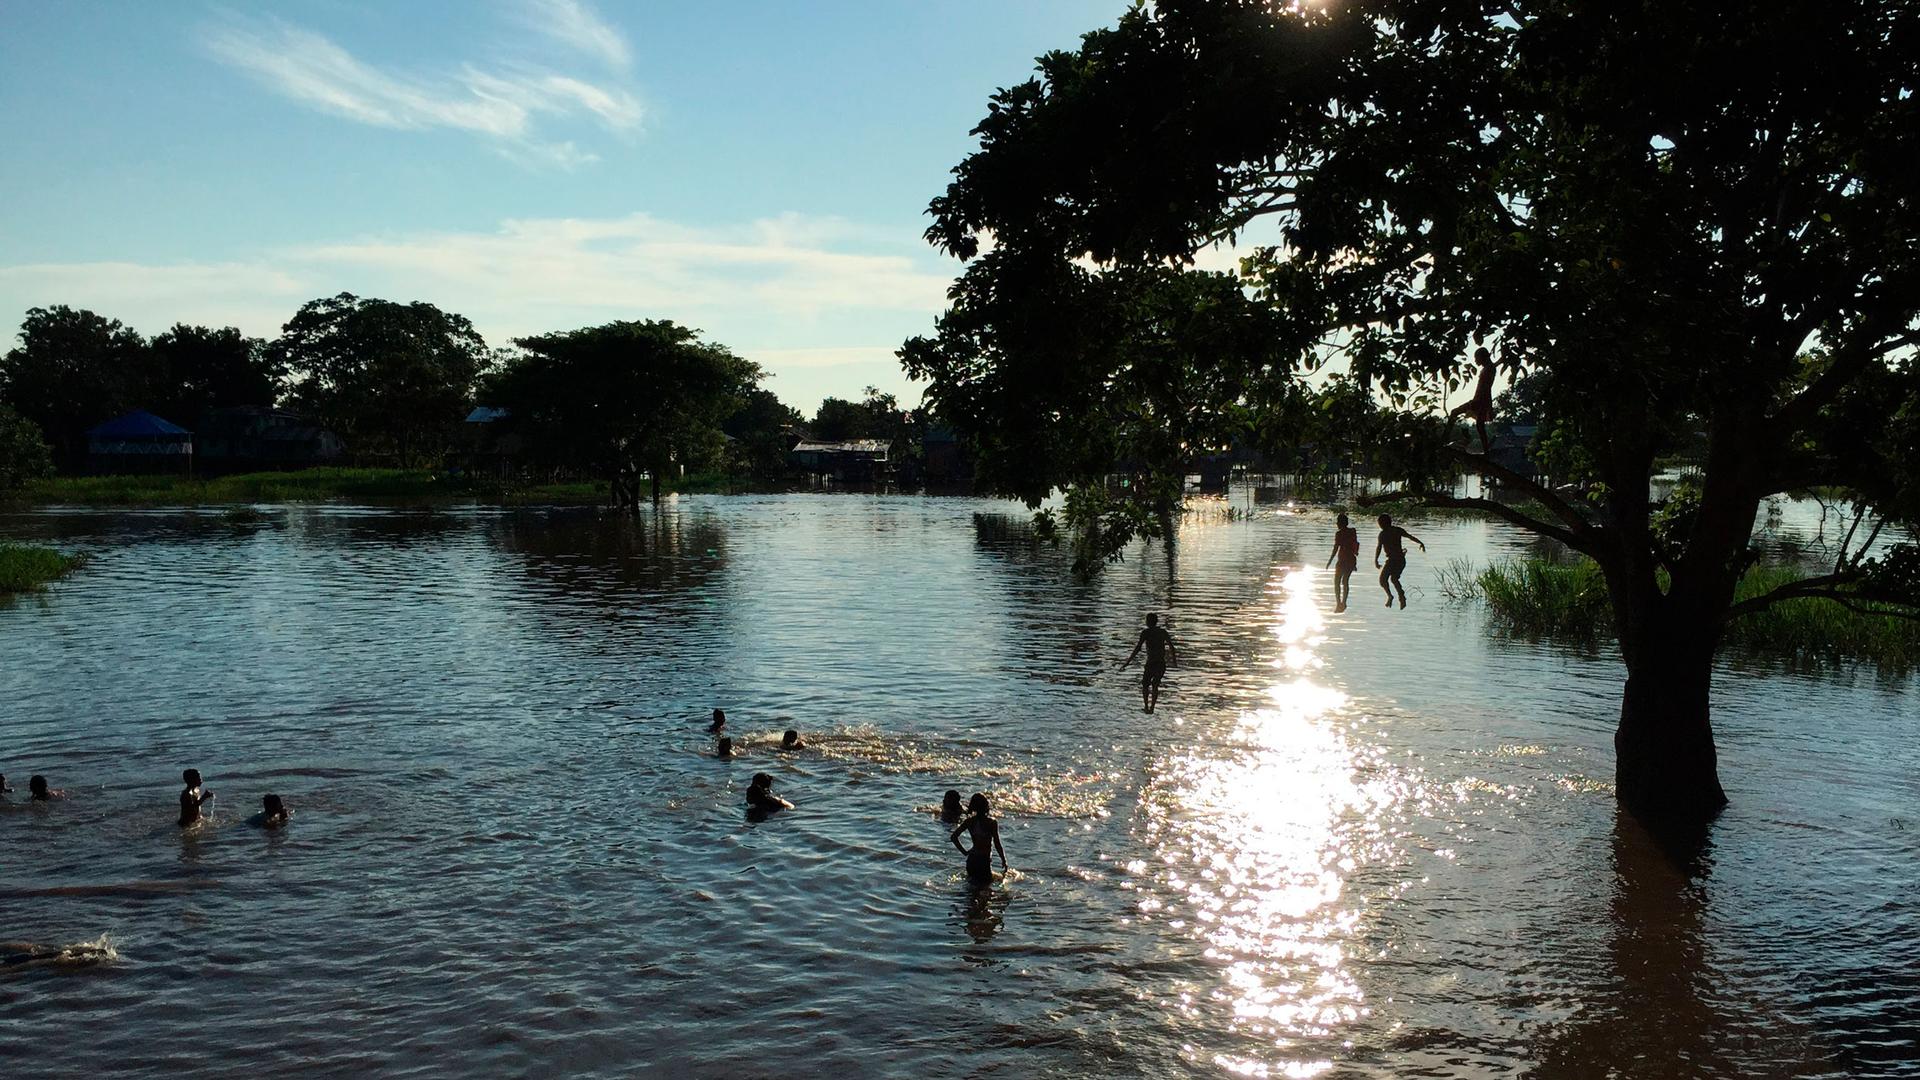 Children play in a flooded area of Leticia, Colombia, Feb. 14, 2017, located by the Amazon River, on the border with Brazil and Peru. 